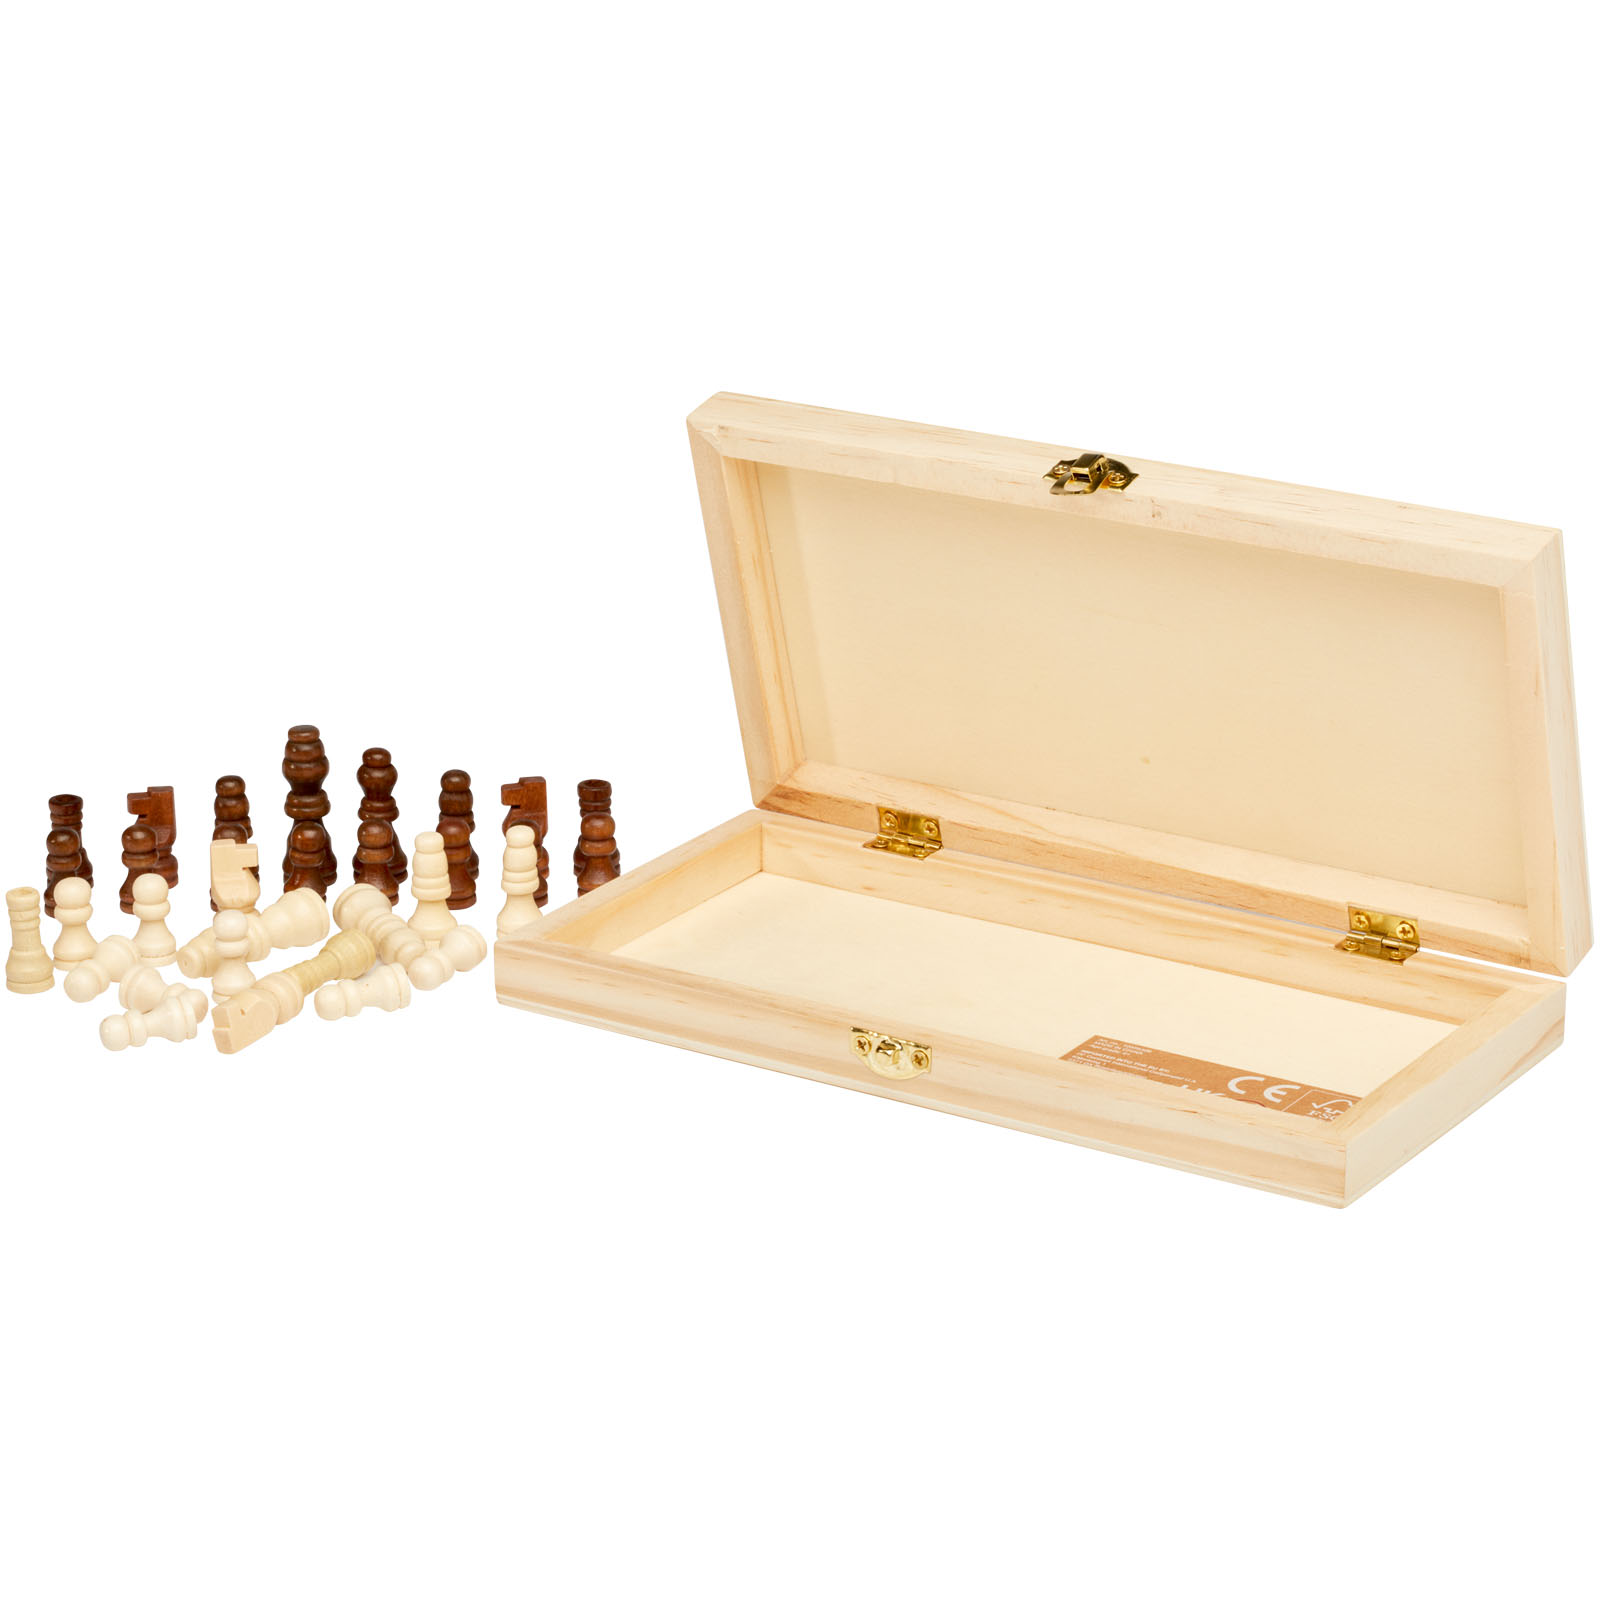 Toys & Games - King wooden chess set